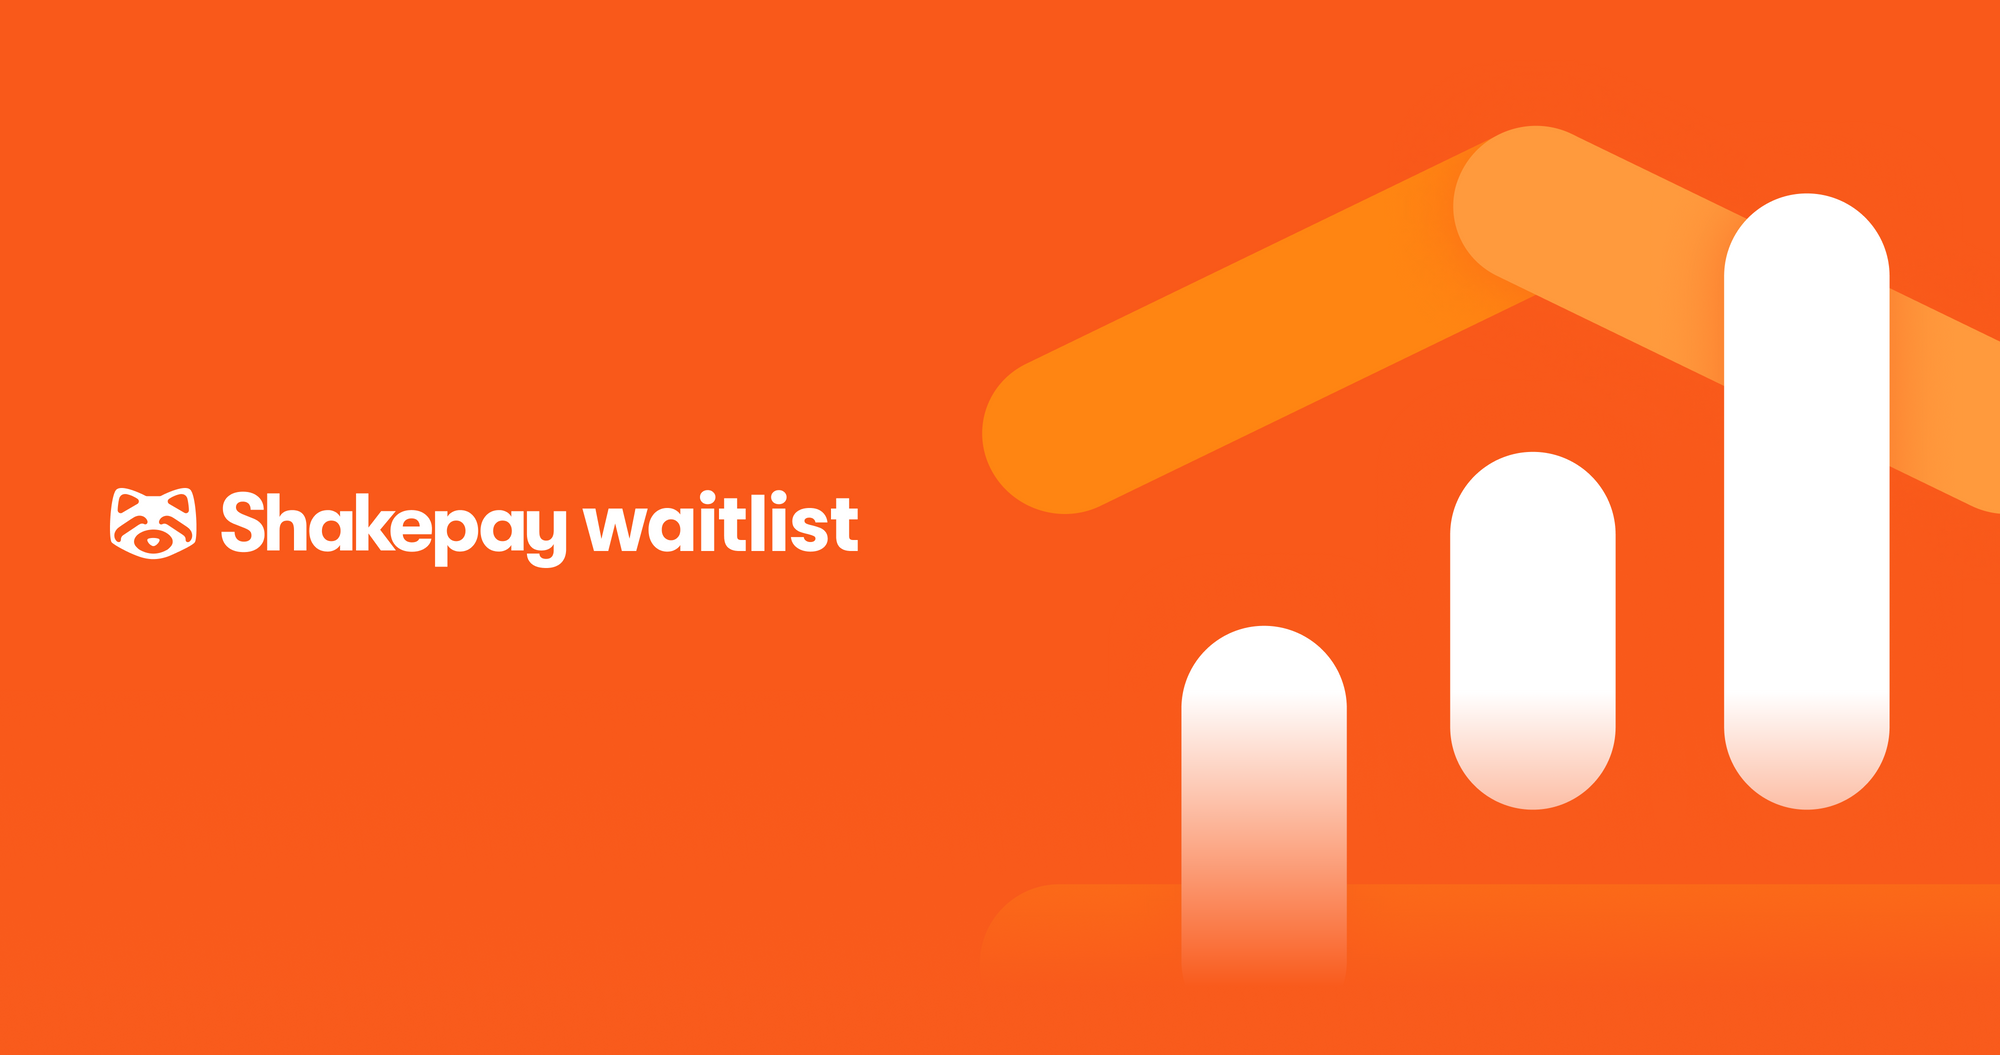 Waitlist 🚨 Everyday payments are coming to Shakepay